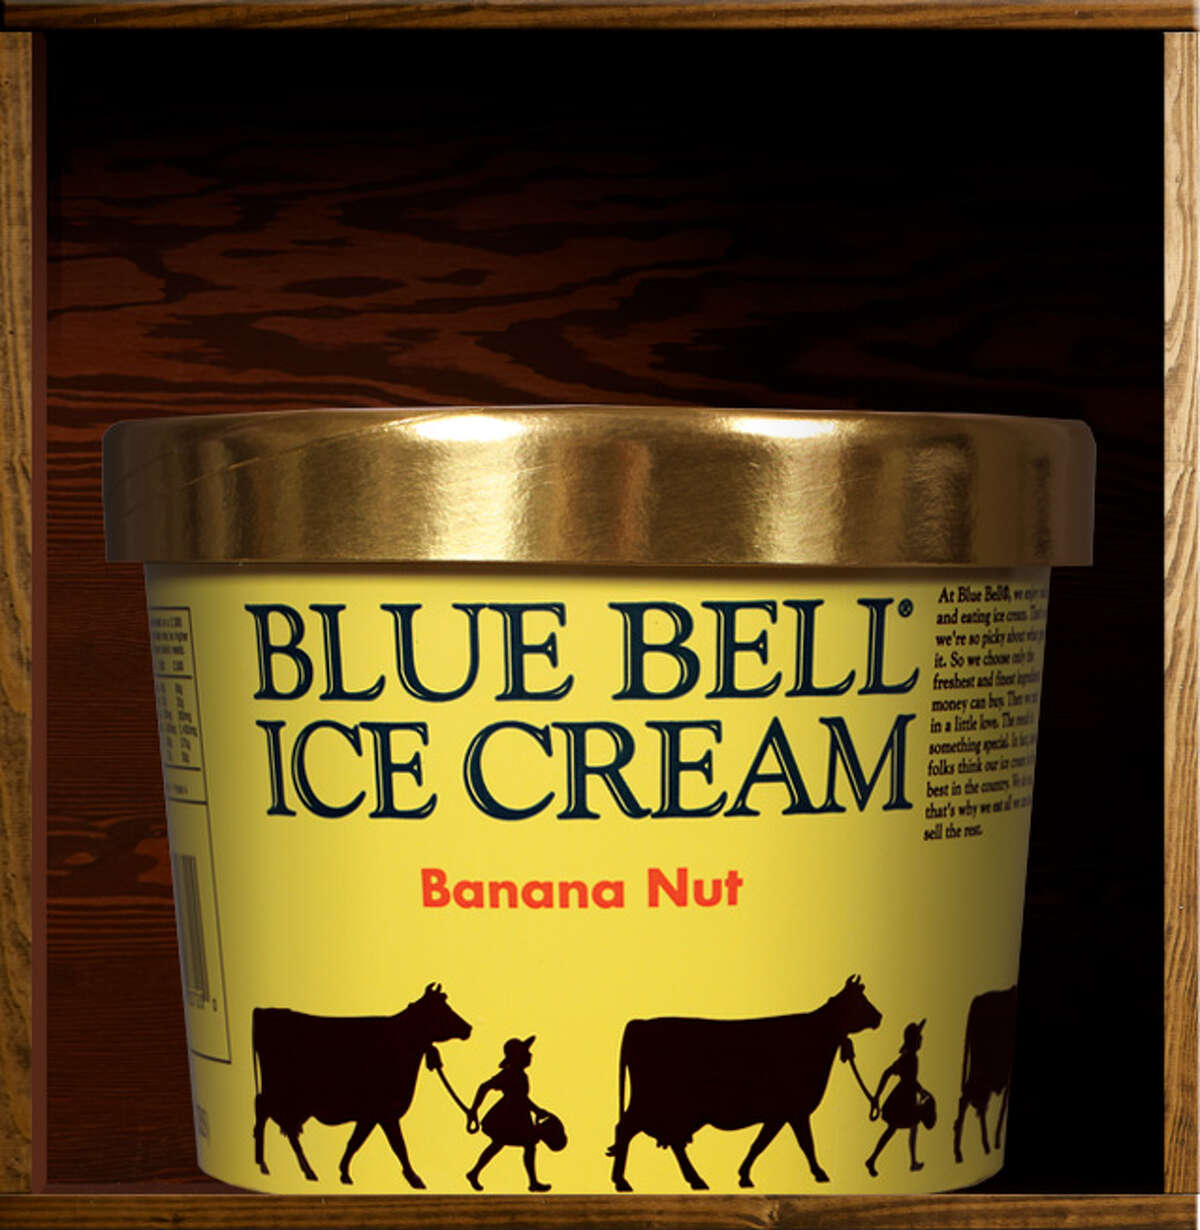 31. Banana Nut Blue Bell description: "Rich banana ice cream with tasty, chopped roasted almonds." Editors' note: Get this bad boy some banana bread chunks.